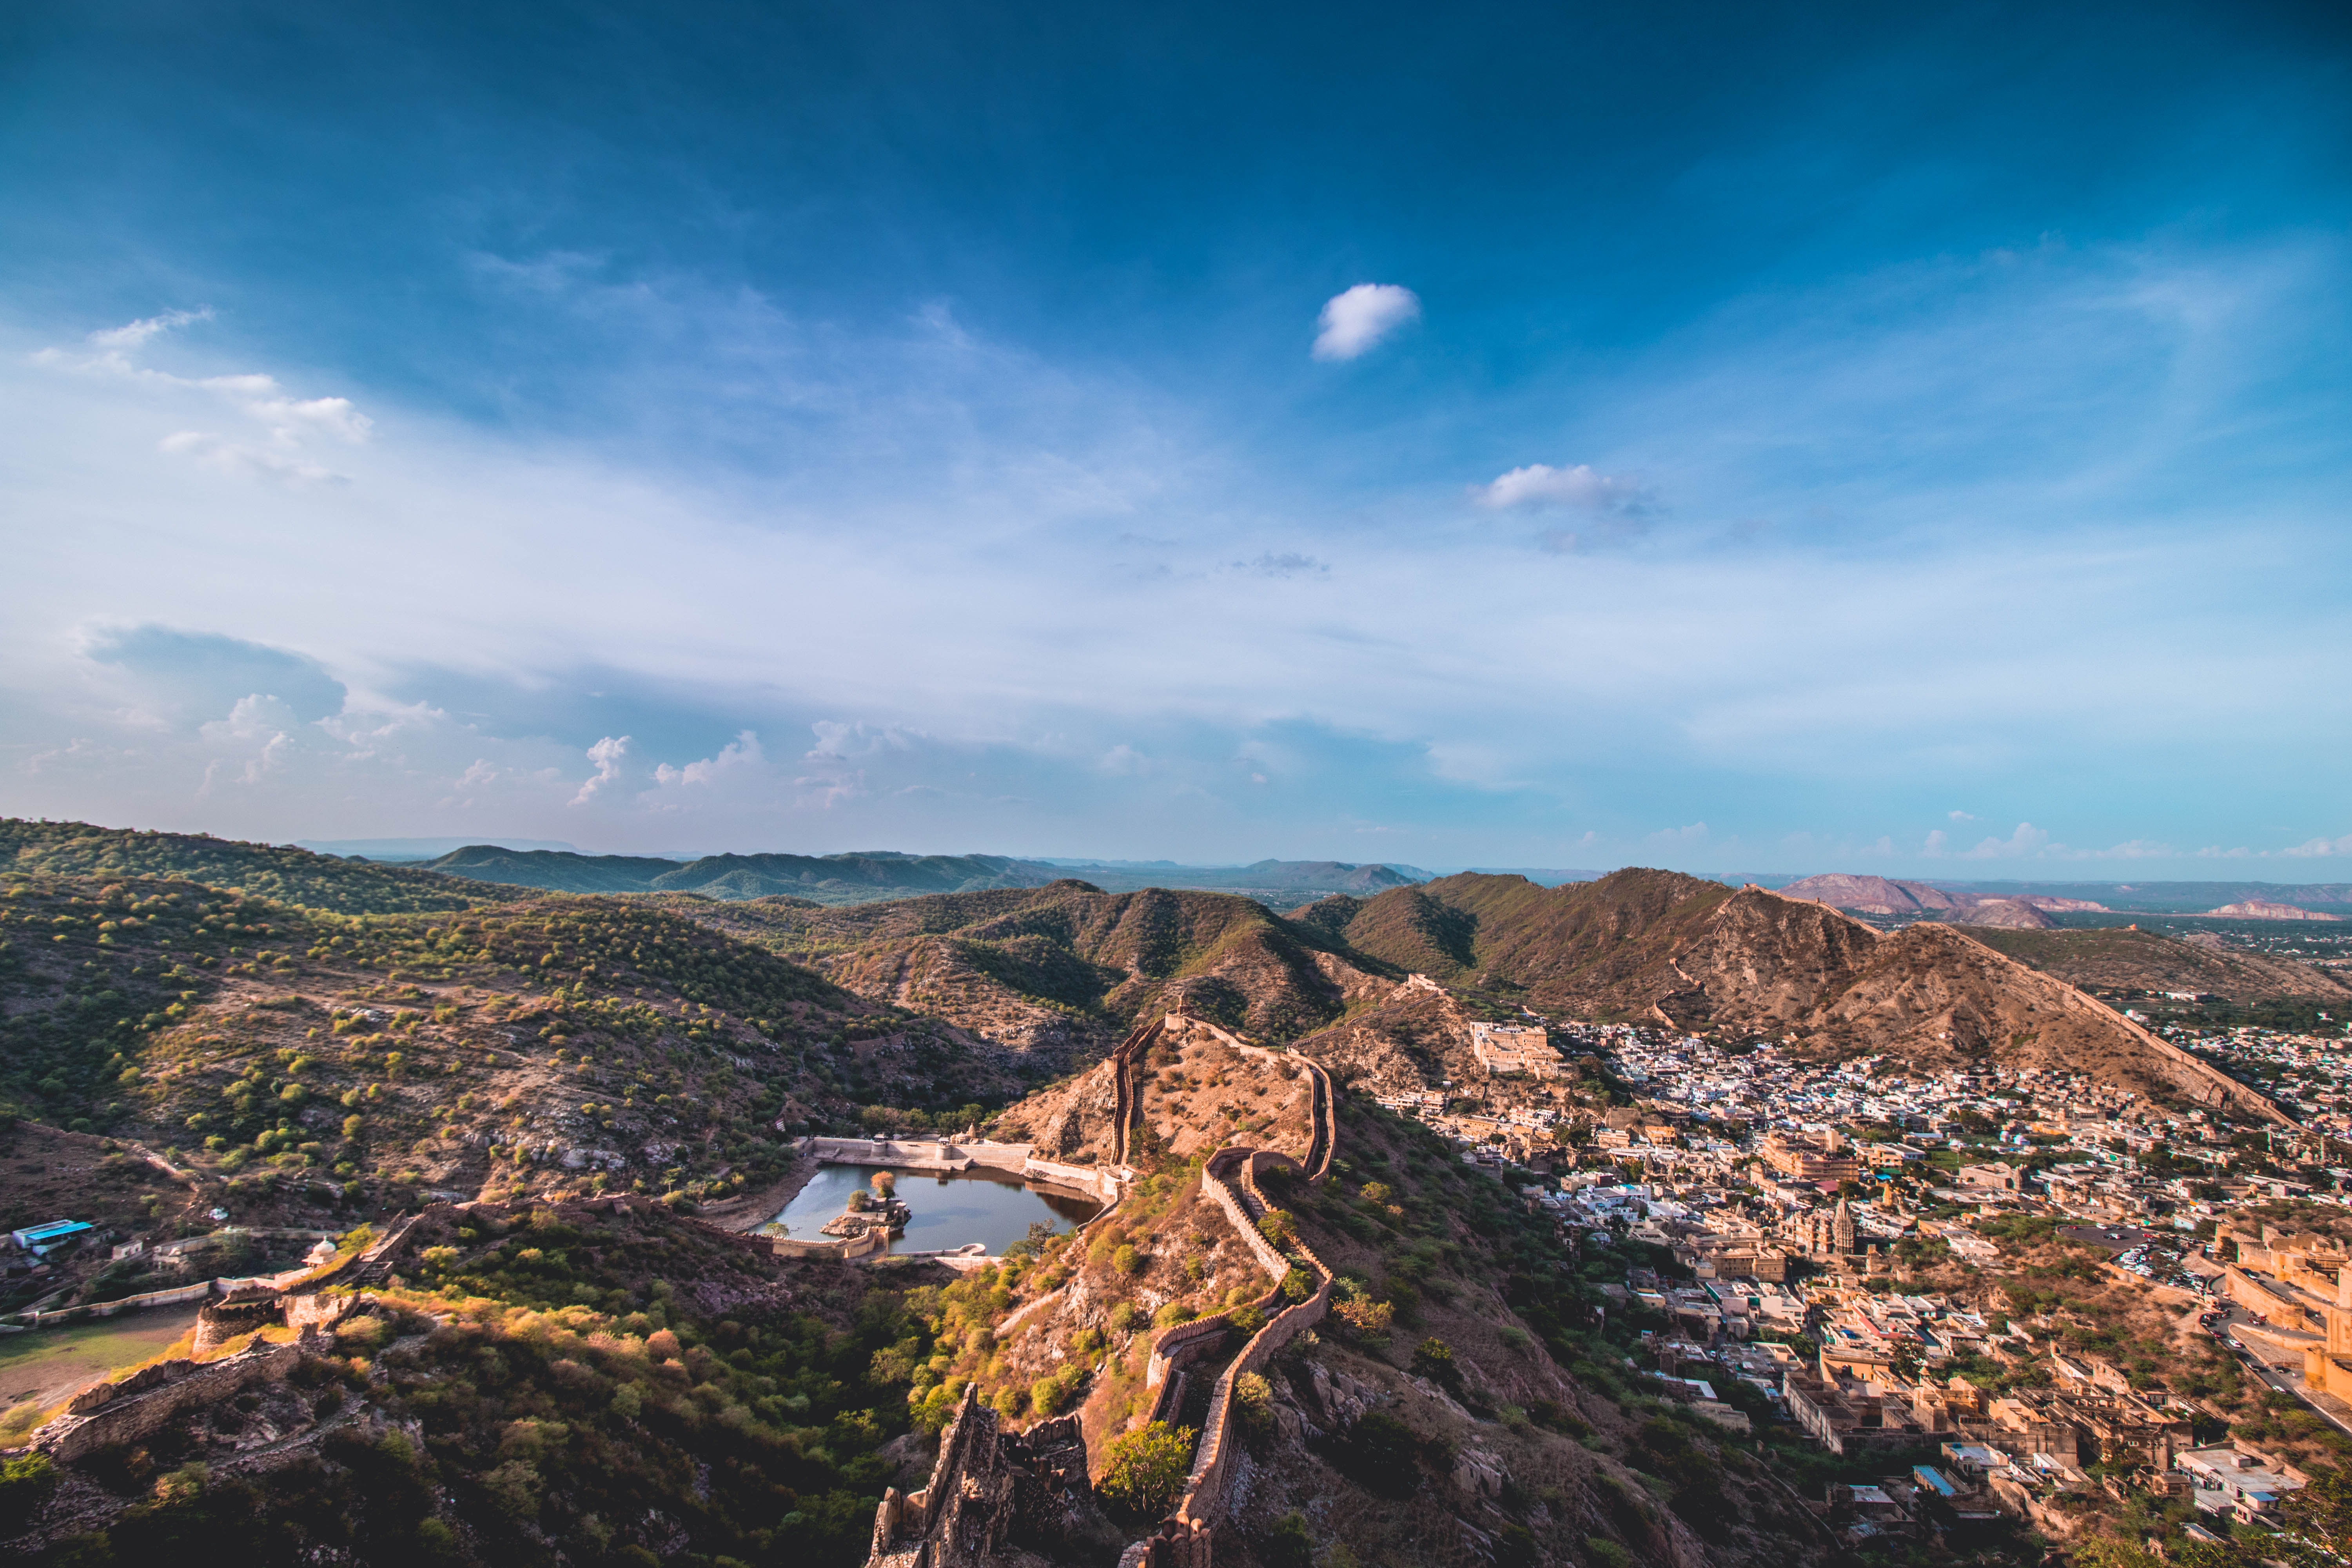 Jaipur is a major tourist attraction in India in march. You should visit Jaipur in March. Here is the aerial view of the city of Jaipur.